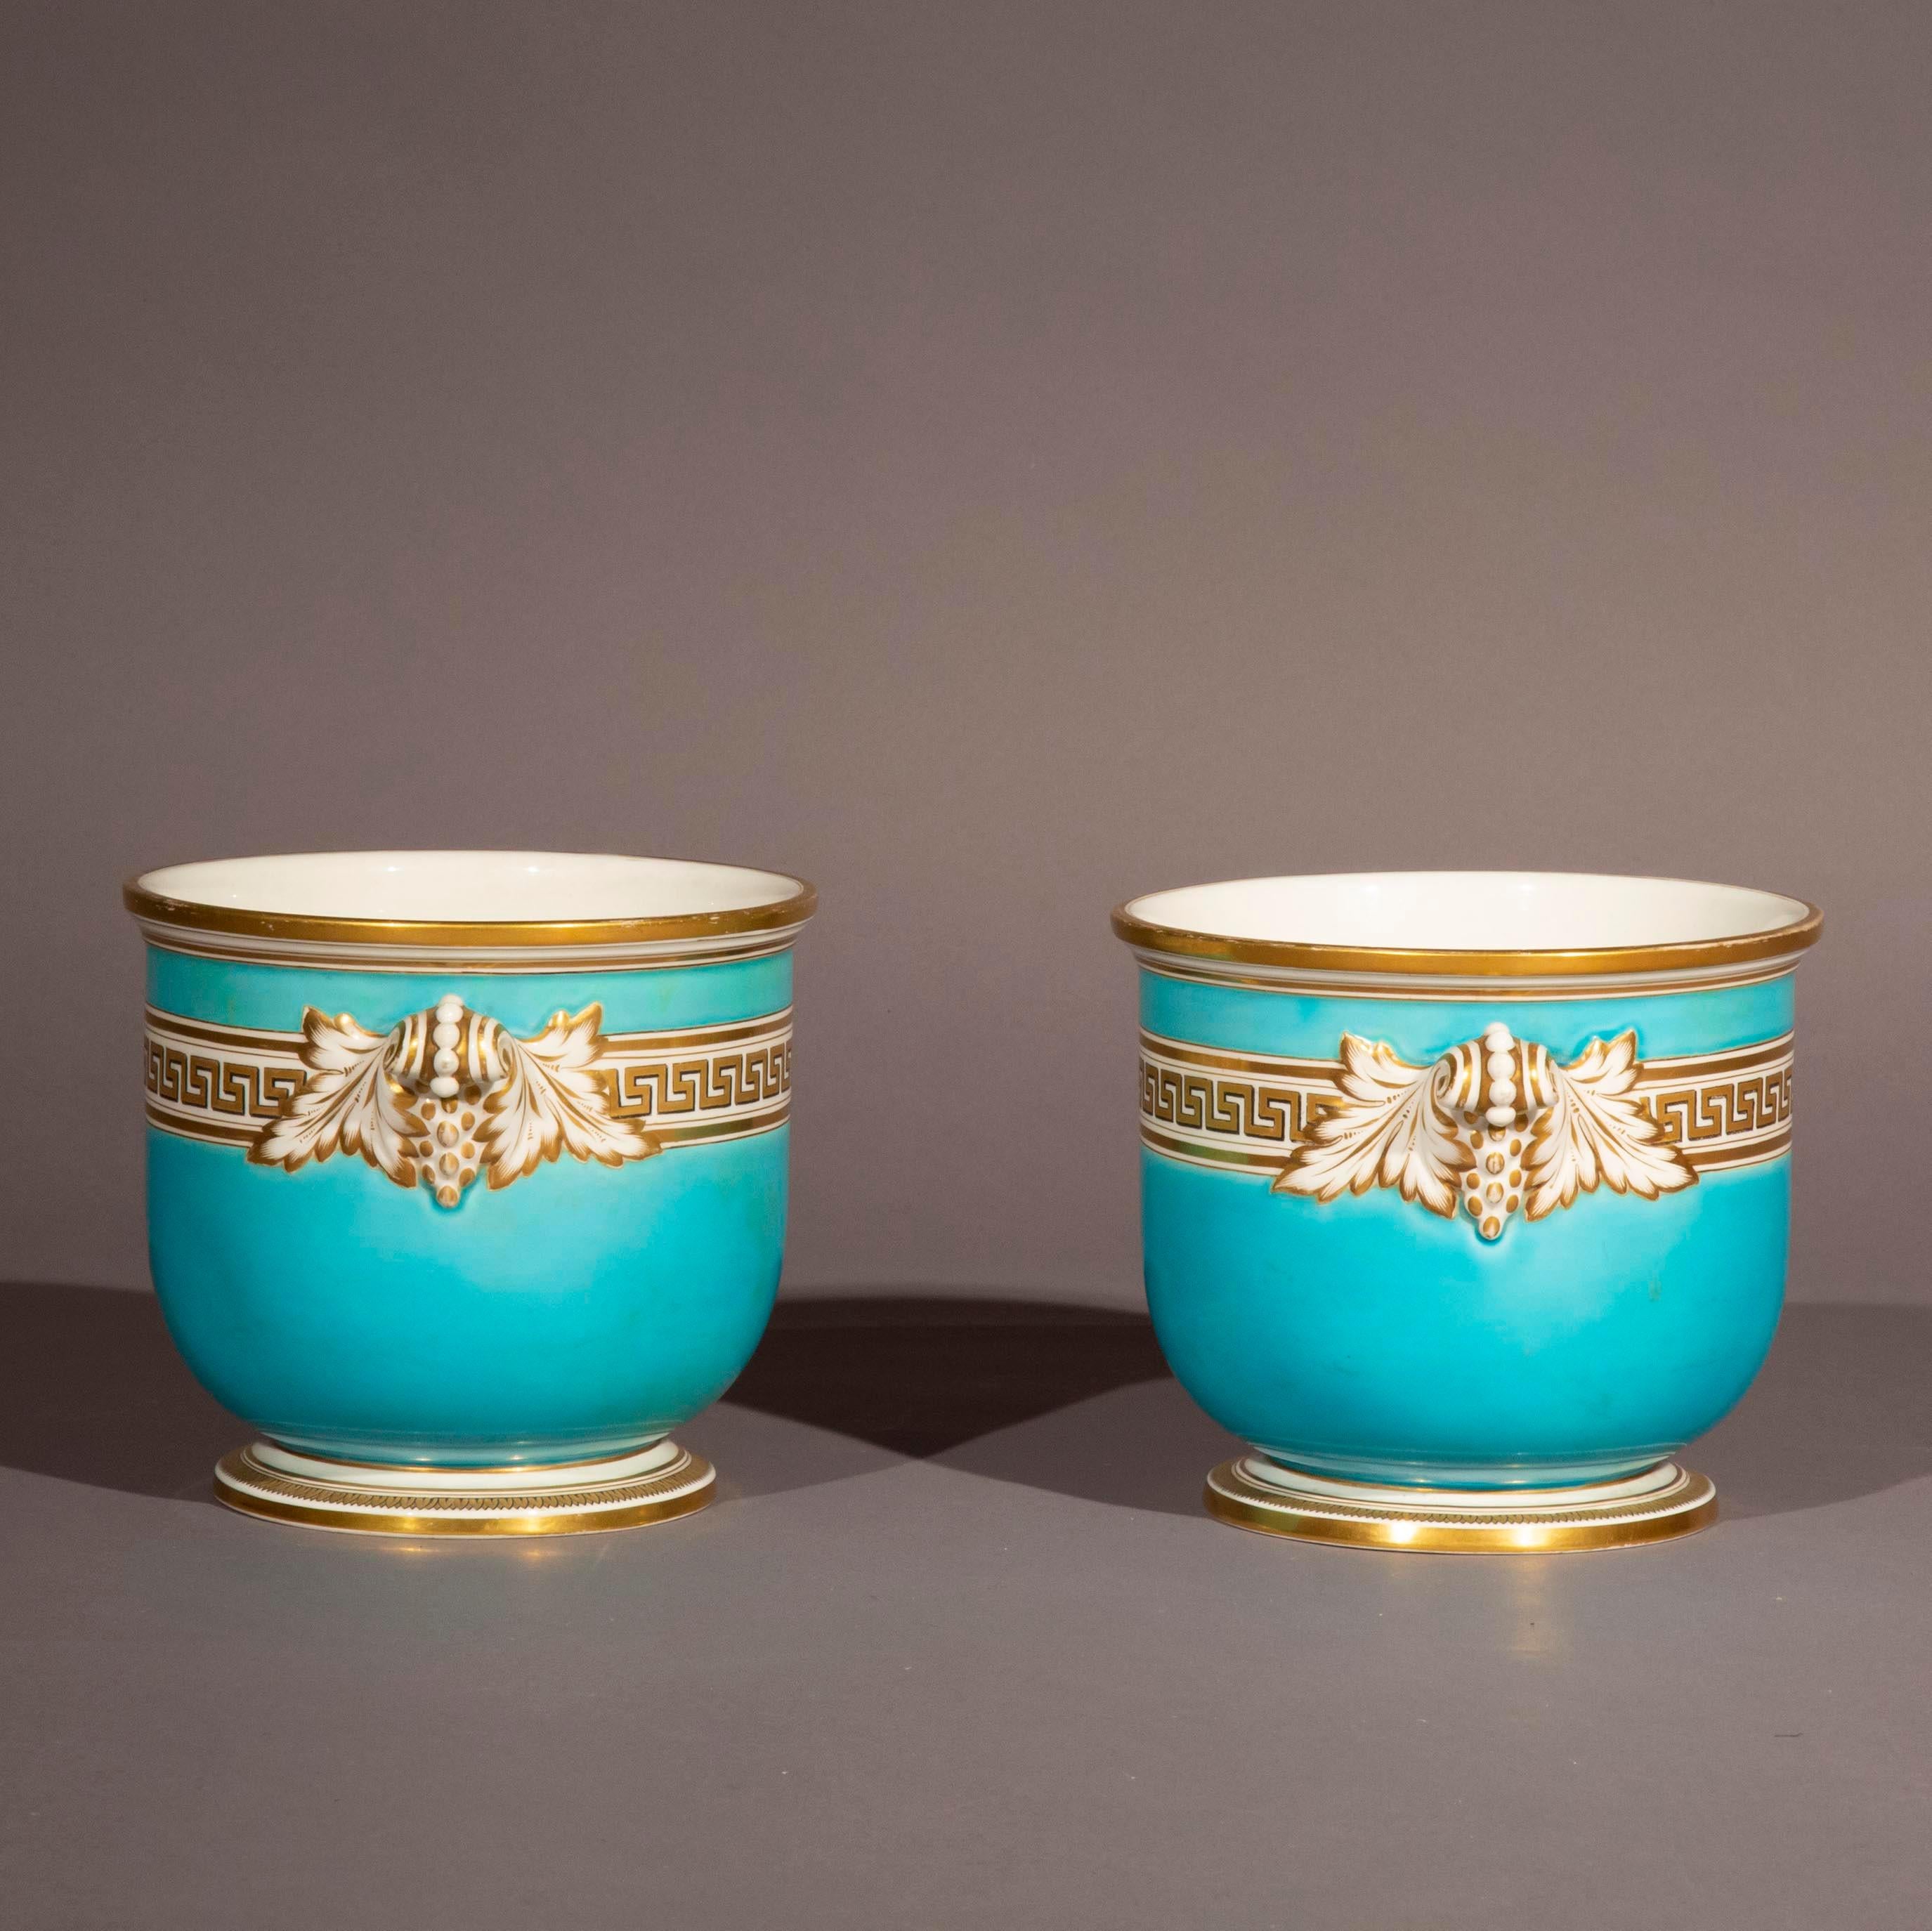 French Antique Pair of 19th Century Porcelain Planters or Ice Buckets